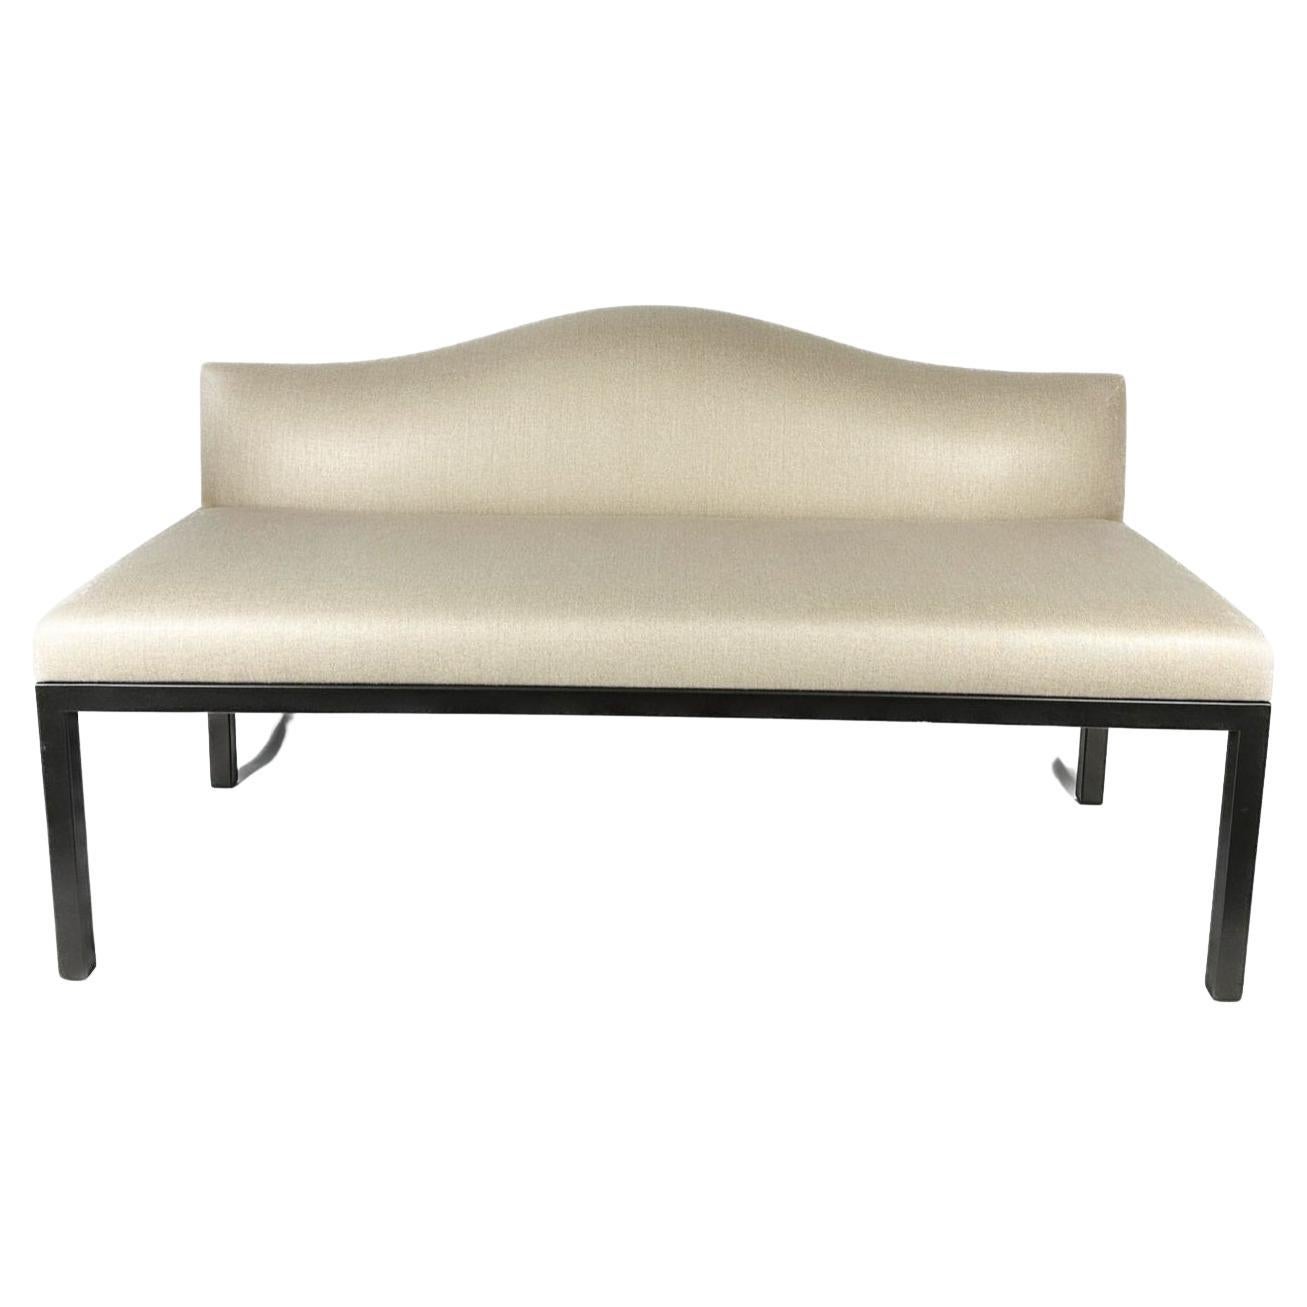 Christian LIAIGRE  Doge" bench seat. For Sale